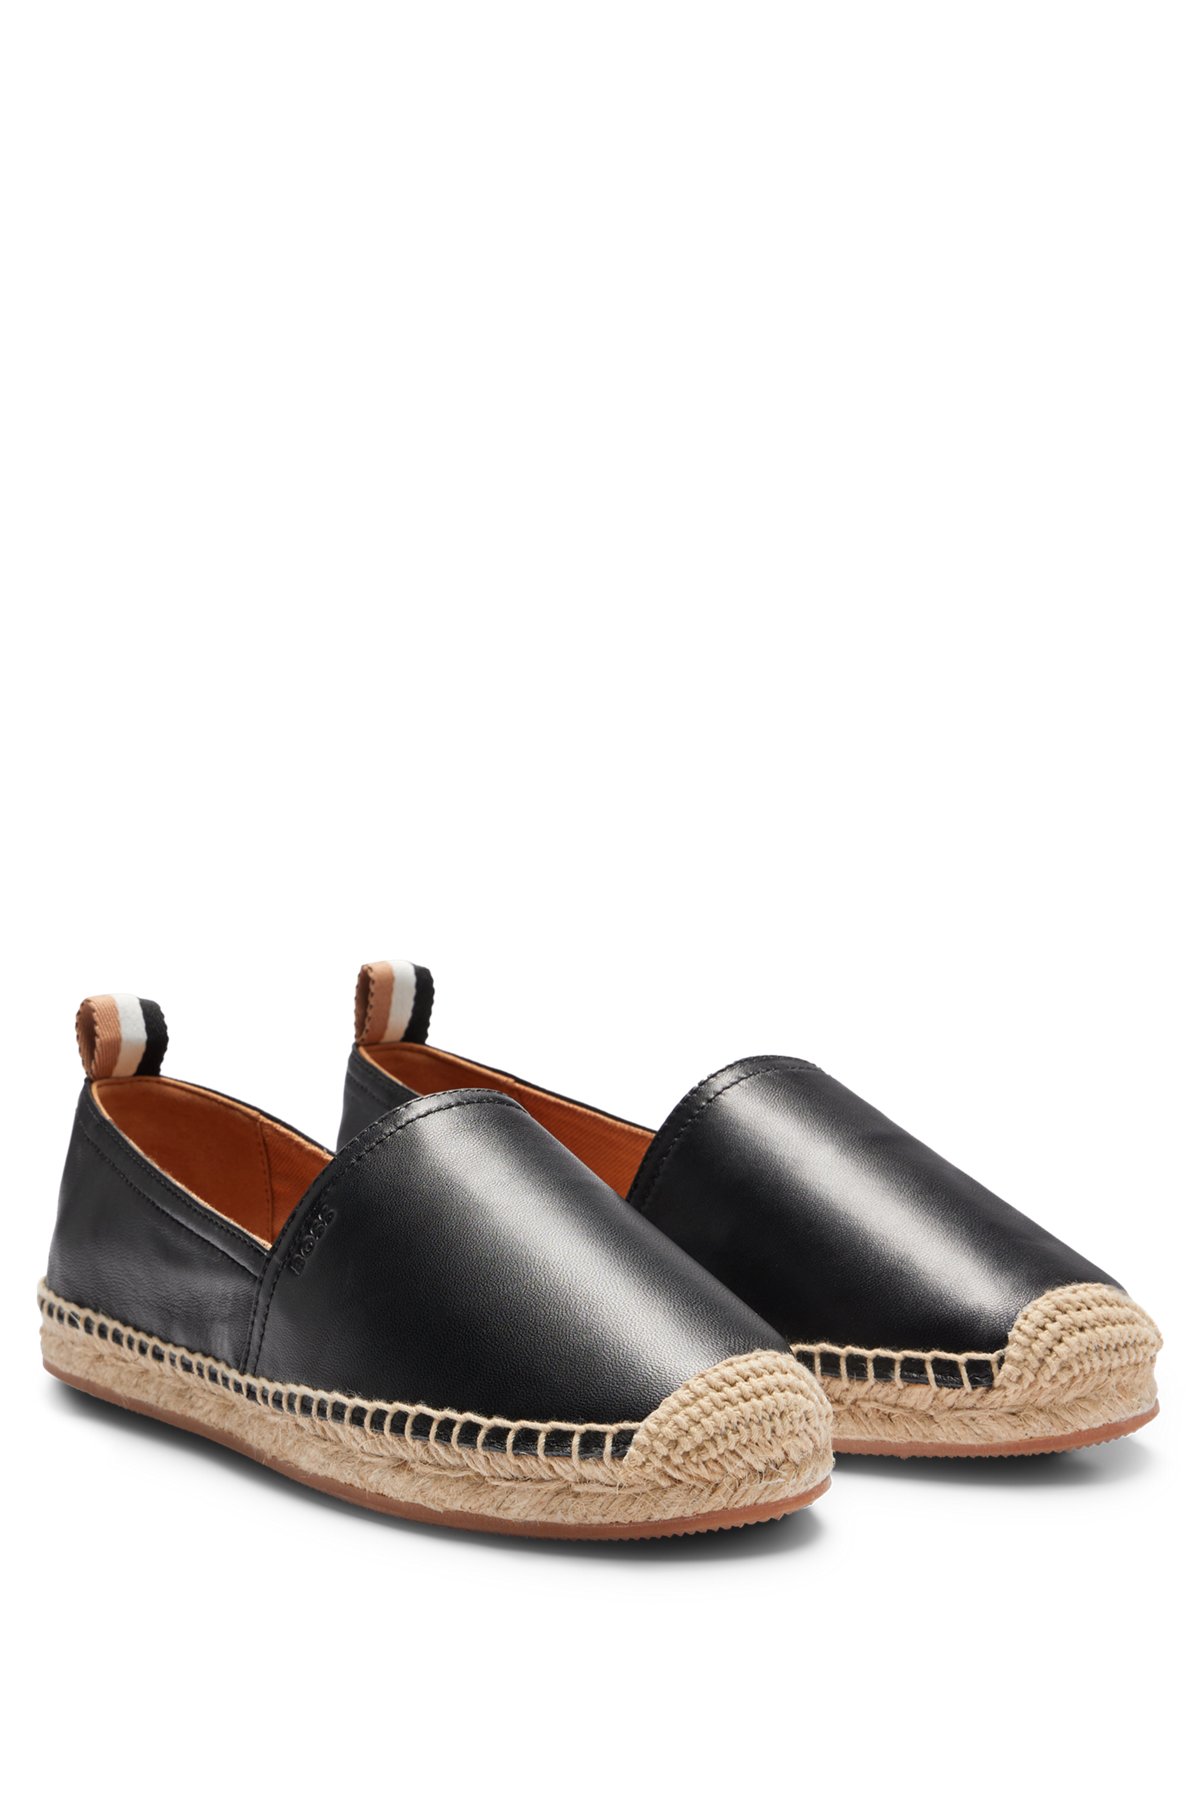 Leather espadrilles with jute sole, Black